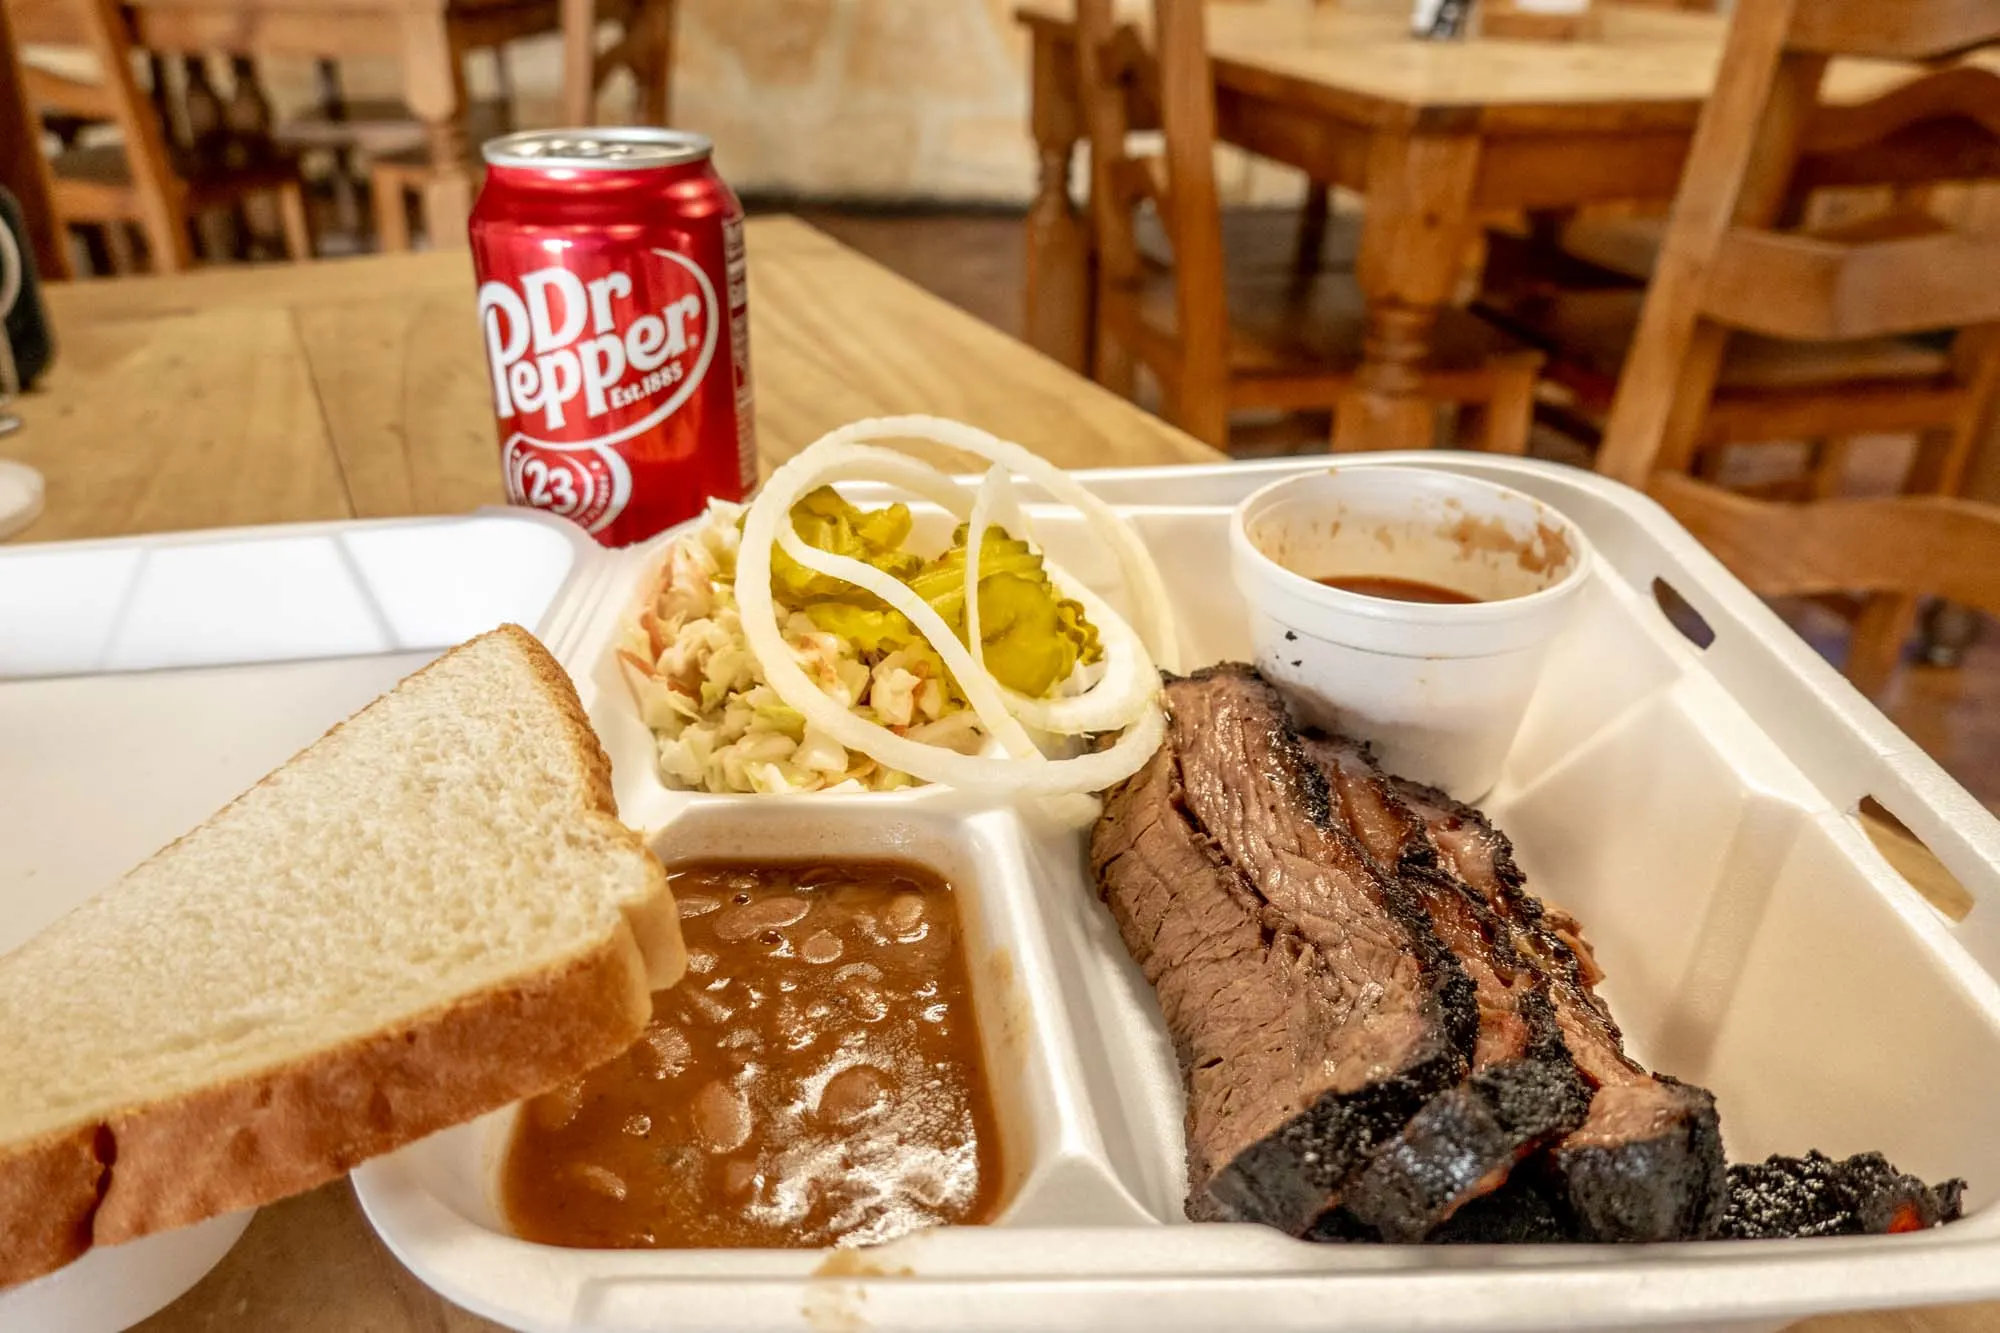 Container with beans, brisket, coleslaw, and bread beside a can of Dr. Pepper